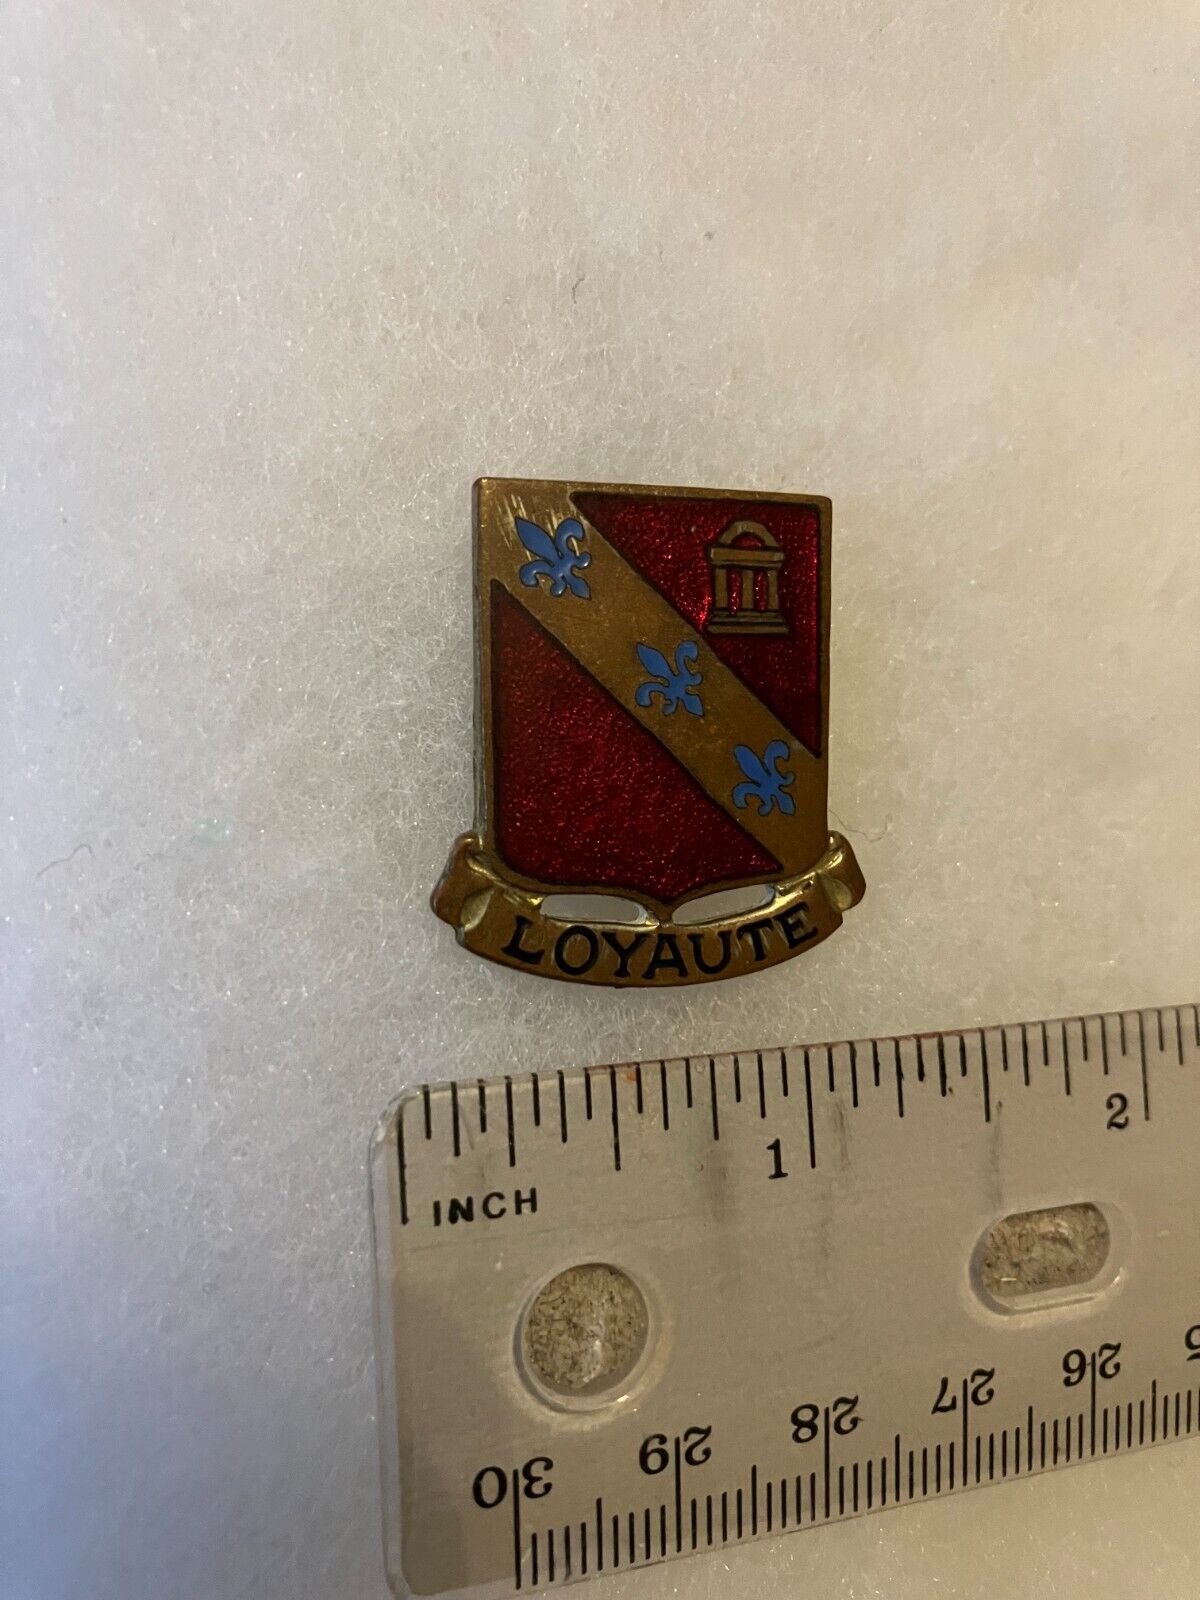 Authentic US Army 319th Artillery DUI DI Crest Insignia 6D 7G